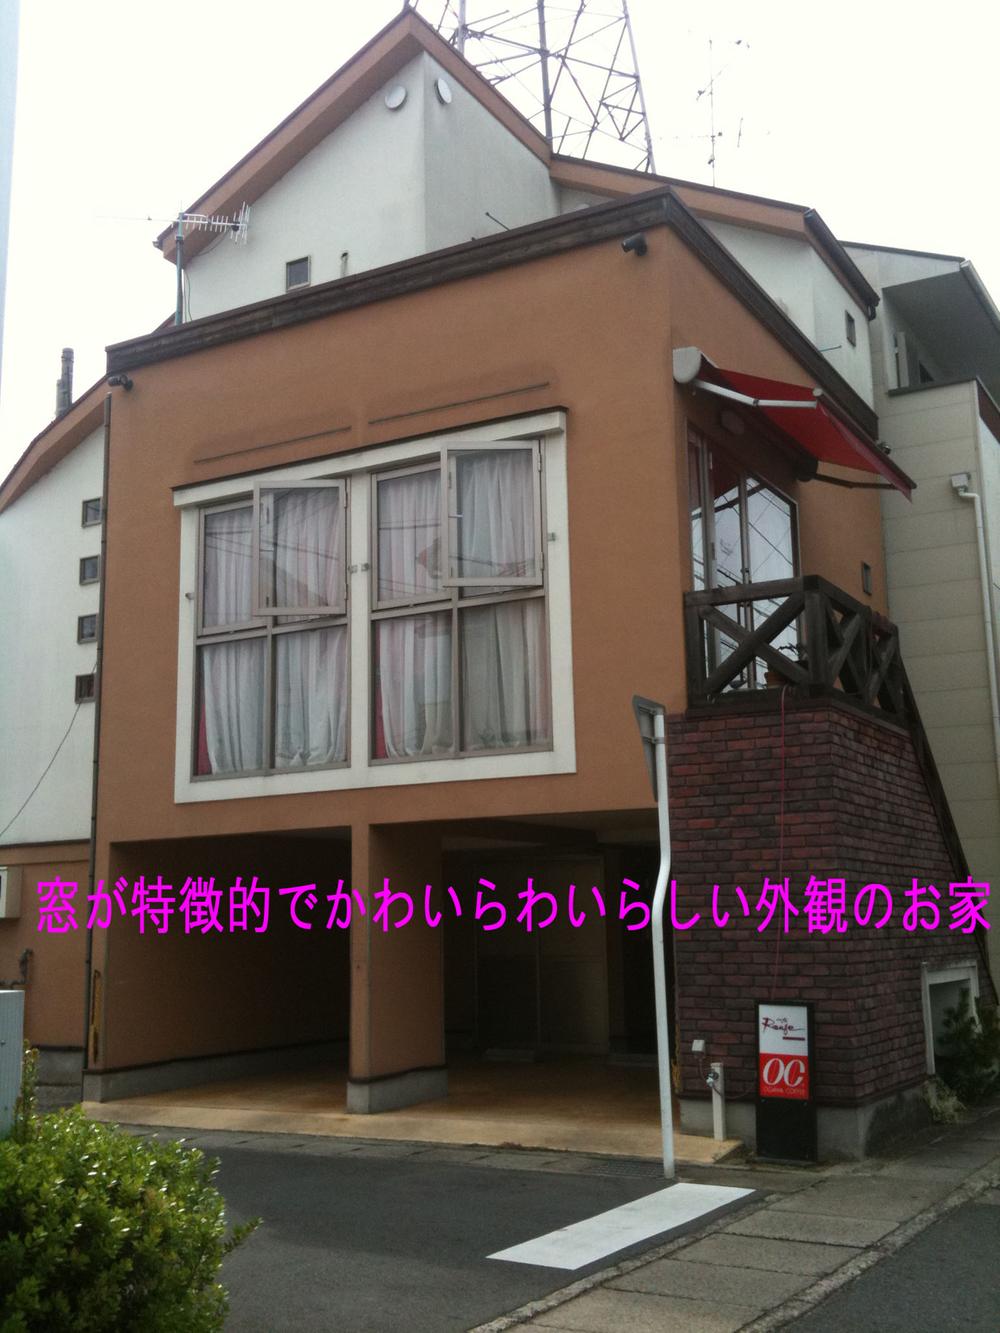 Local appearance photo. House of appearance is pretty atmosphere ☆ Toilets are two places ・ There is also a shower room